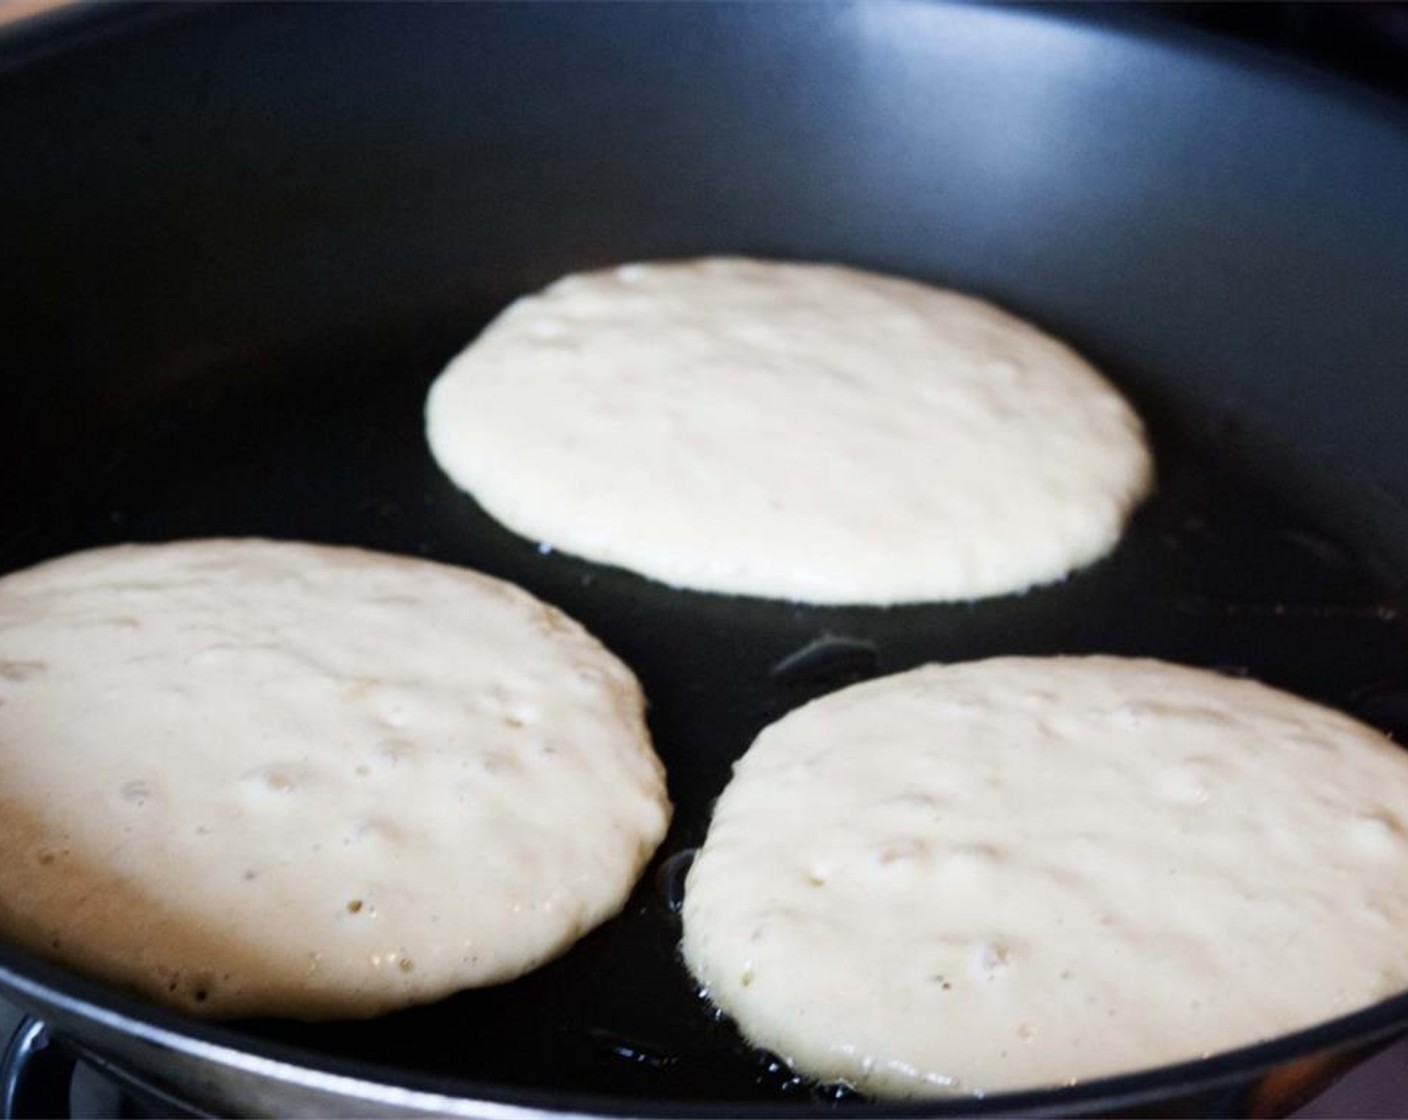 step 5 Heat a nonstick pan over medium heat. Ladle 1/4 cup of batter onto the pan for smaller pancakes. Cook on one side until the edges are just set and tiny bubbles appear on the surface of the pancake, about 2 minutes.